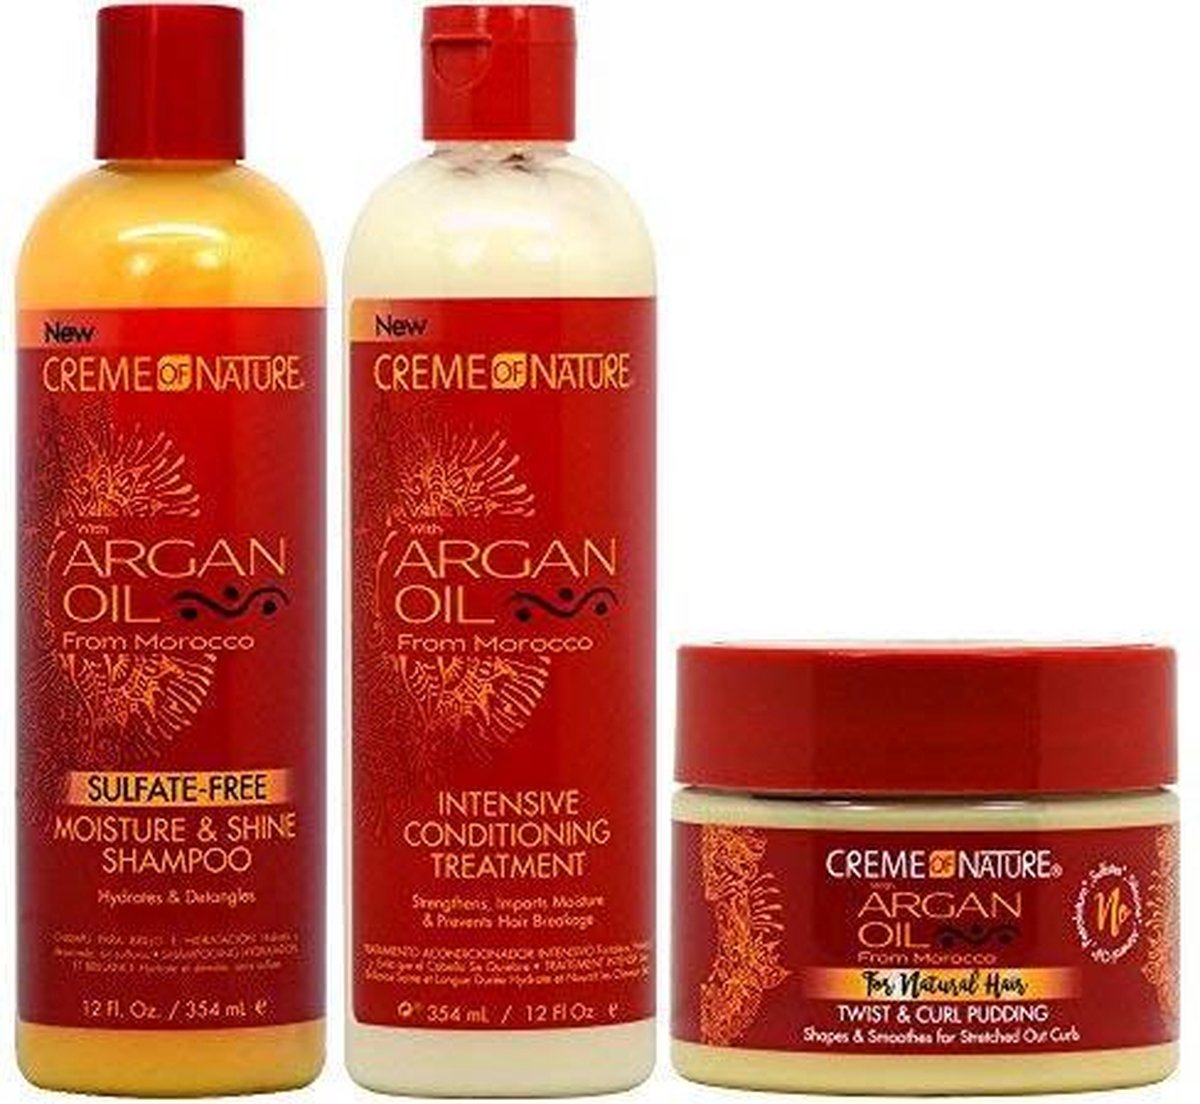 Creme of Nature Argan Oil Moisture Shampoo + Intensive Treatment + Twist and Curl Pudding